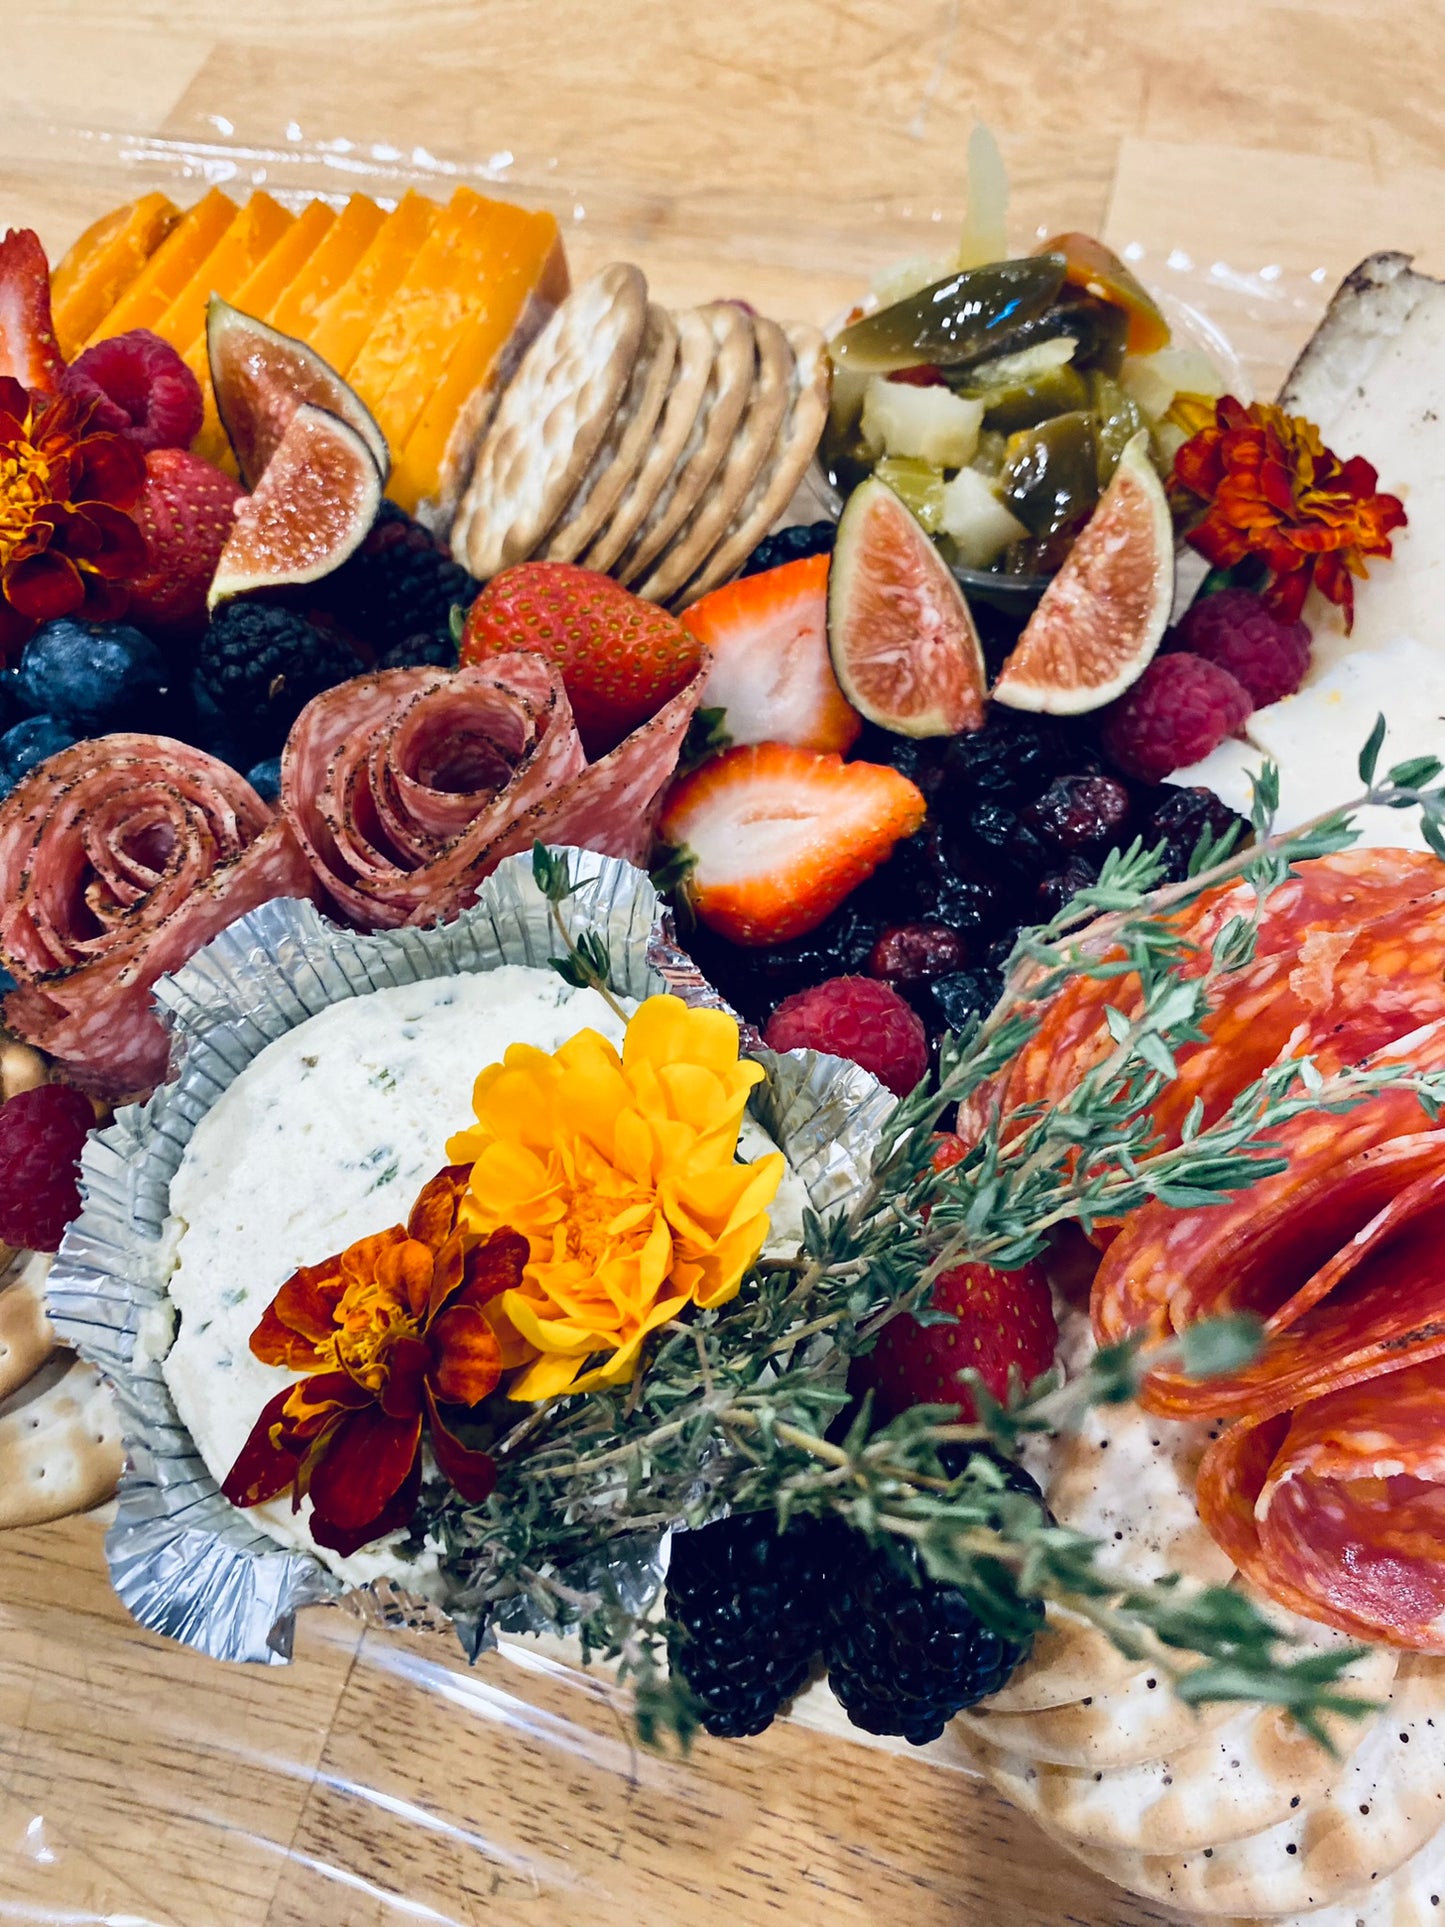 Classic Charcuterie & Cheese